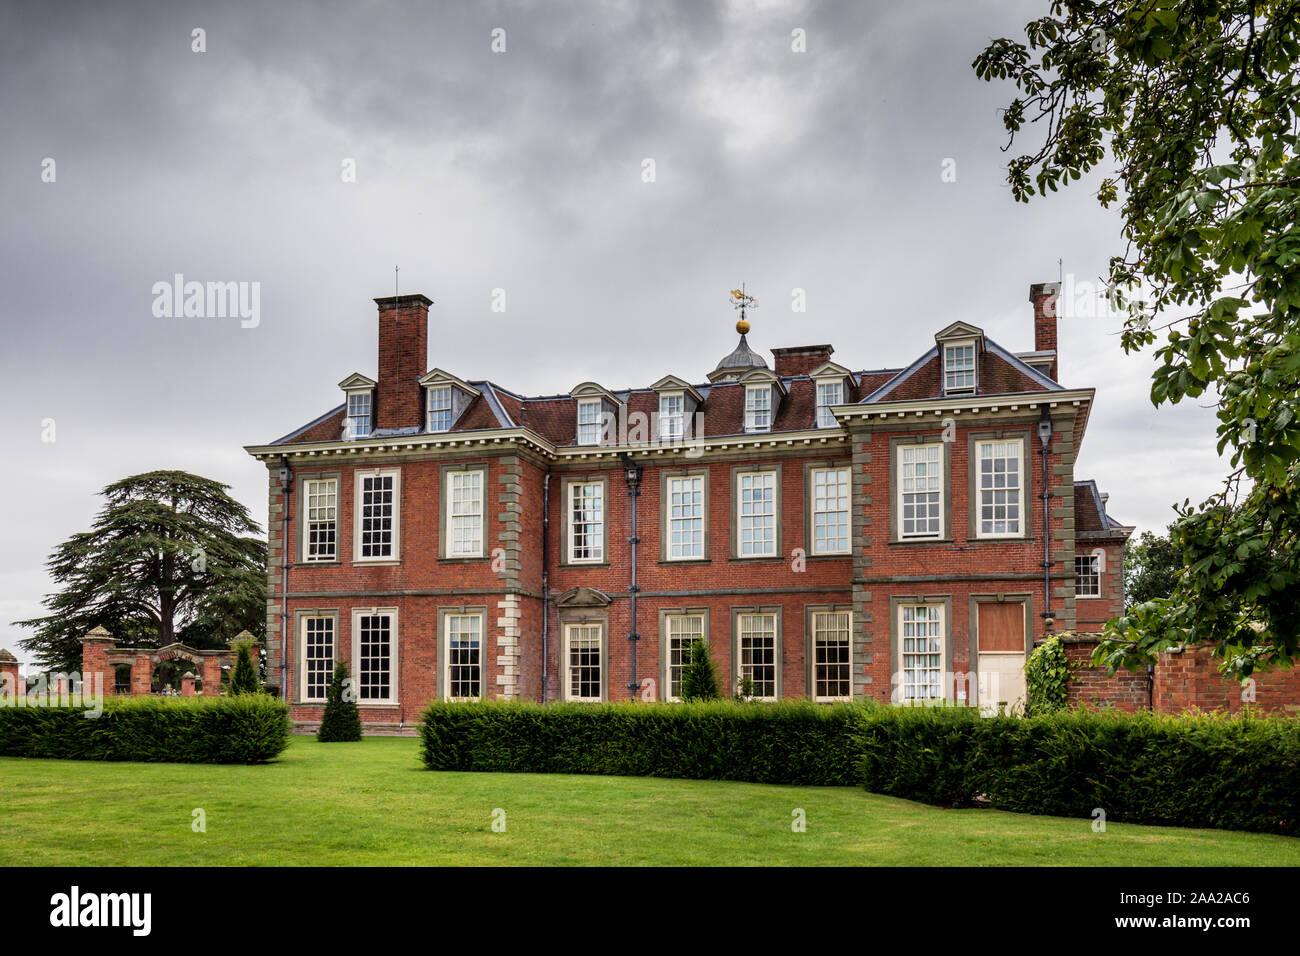 Hanbury Hall is a large stately home, built in the early 18th century, standing in parkland at Hanbury, Worcestershire, England, UK Stock Photo